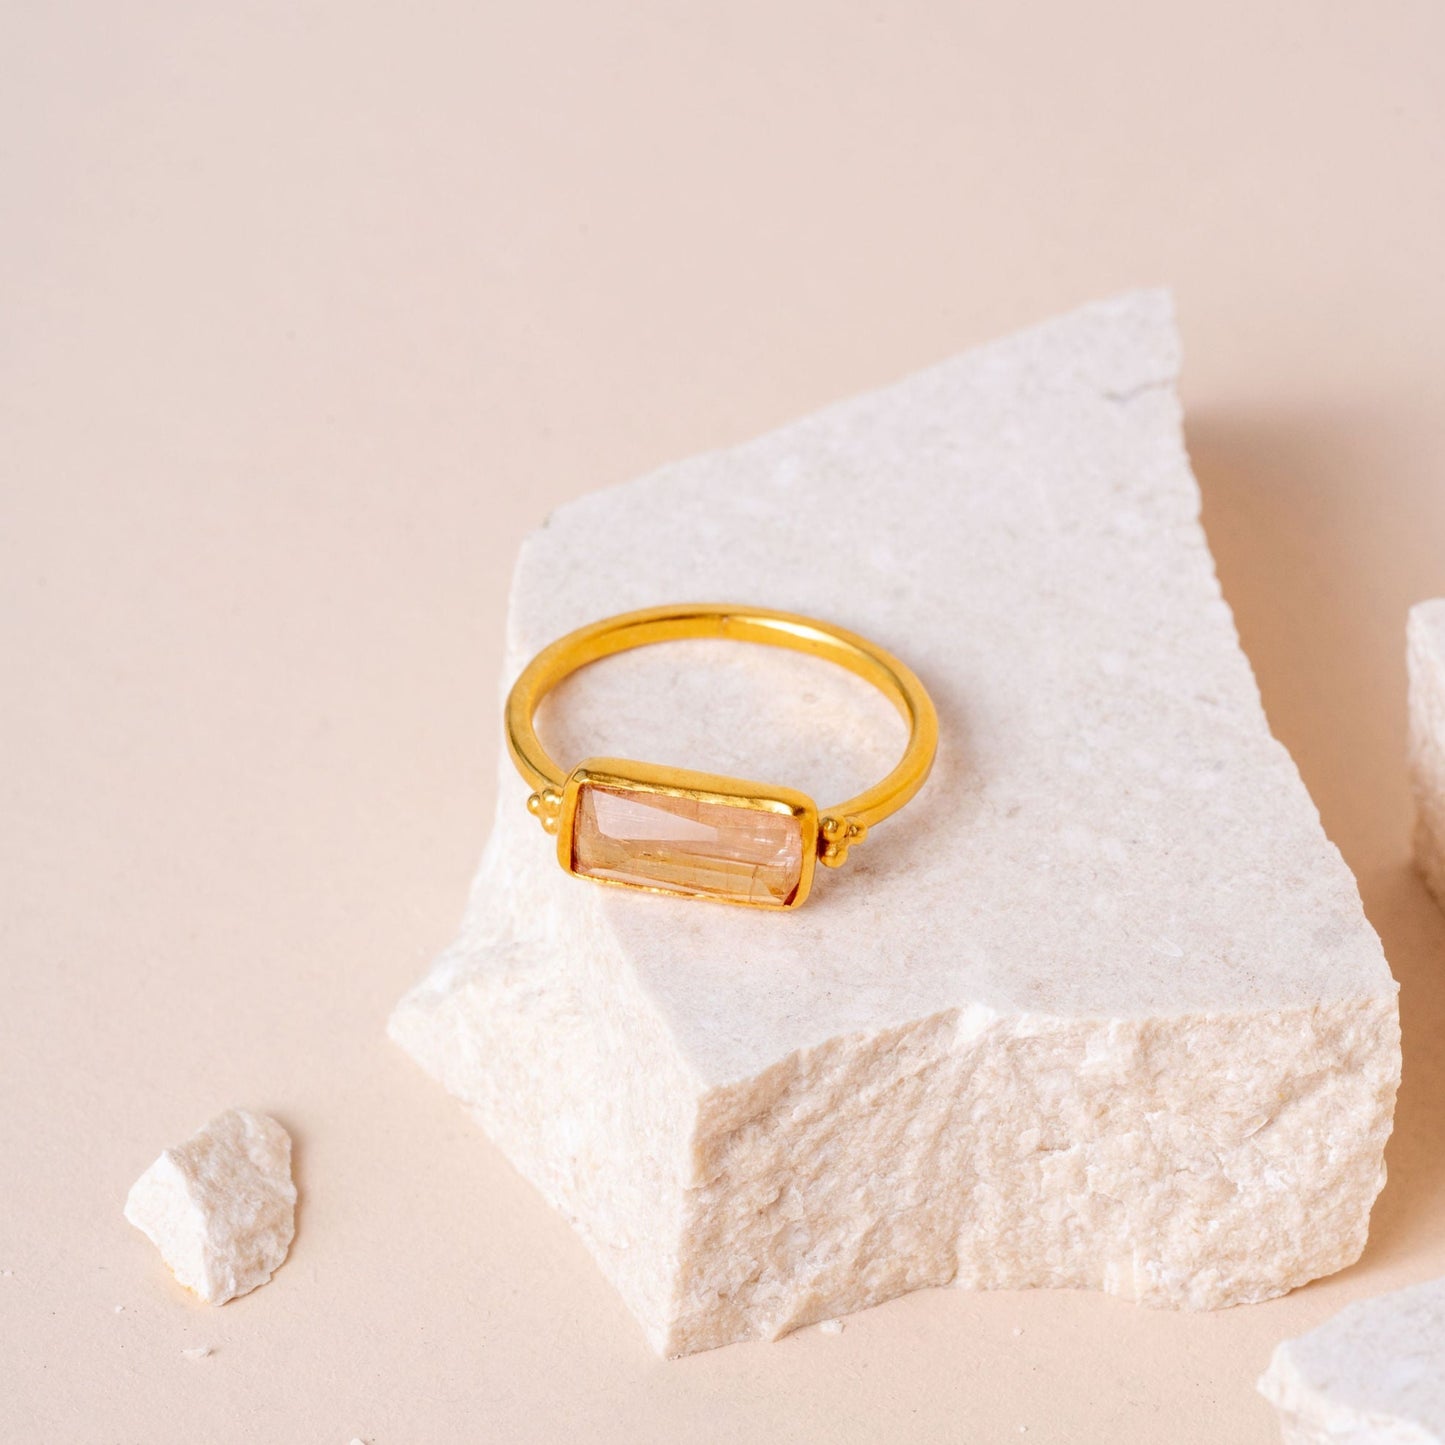 Handcrafted gold ring featuring a sunset-inspired rectangular tourmaline.